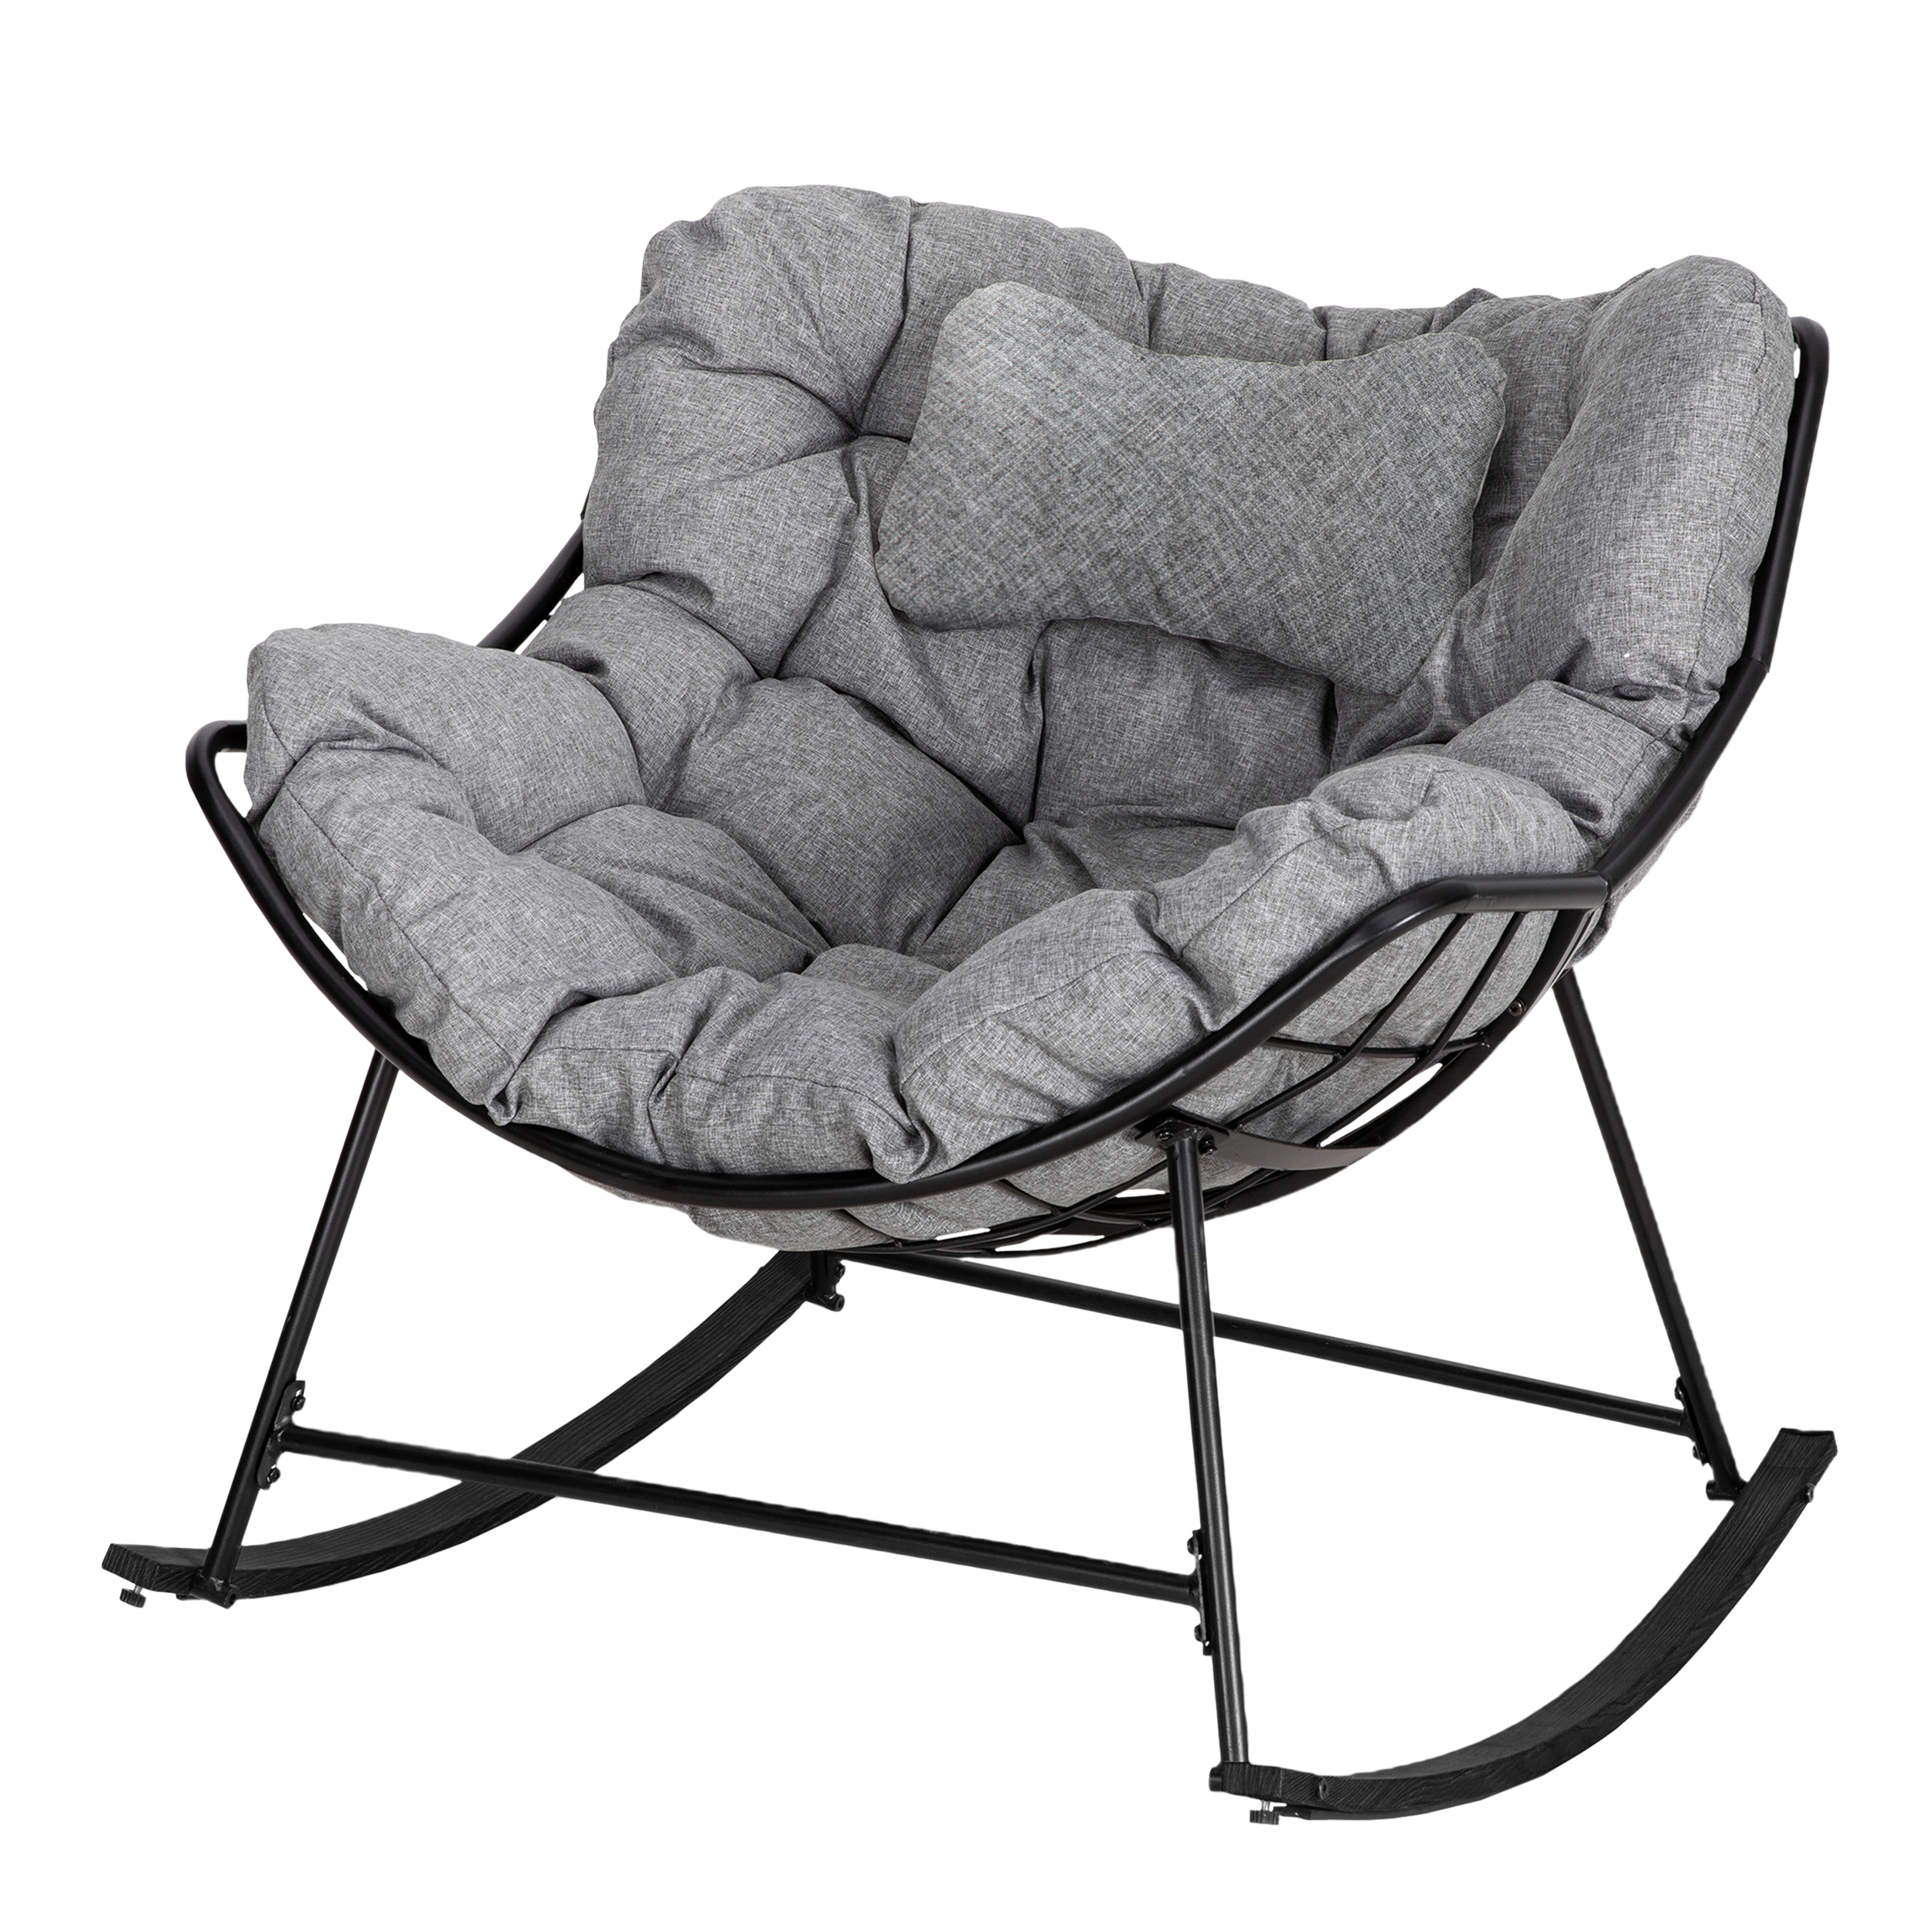 Eclife Metal Patio Rocking Chair Egg Shaped Lounge Rocker Bistro Chair Set with Gray Thick Fabric Cushion and Pillow for Indoor Outdoor Garden Balcony - image 1 of 11